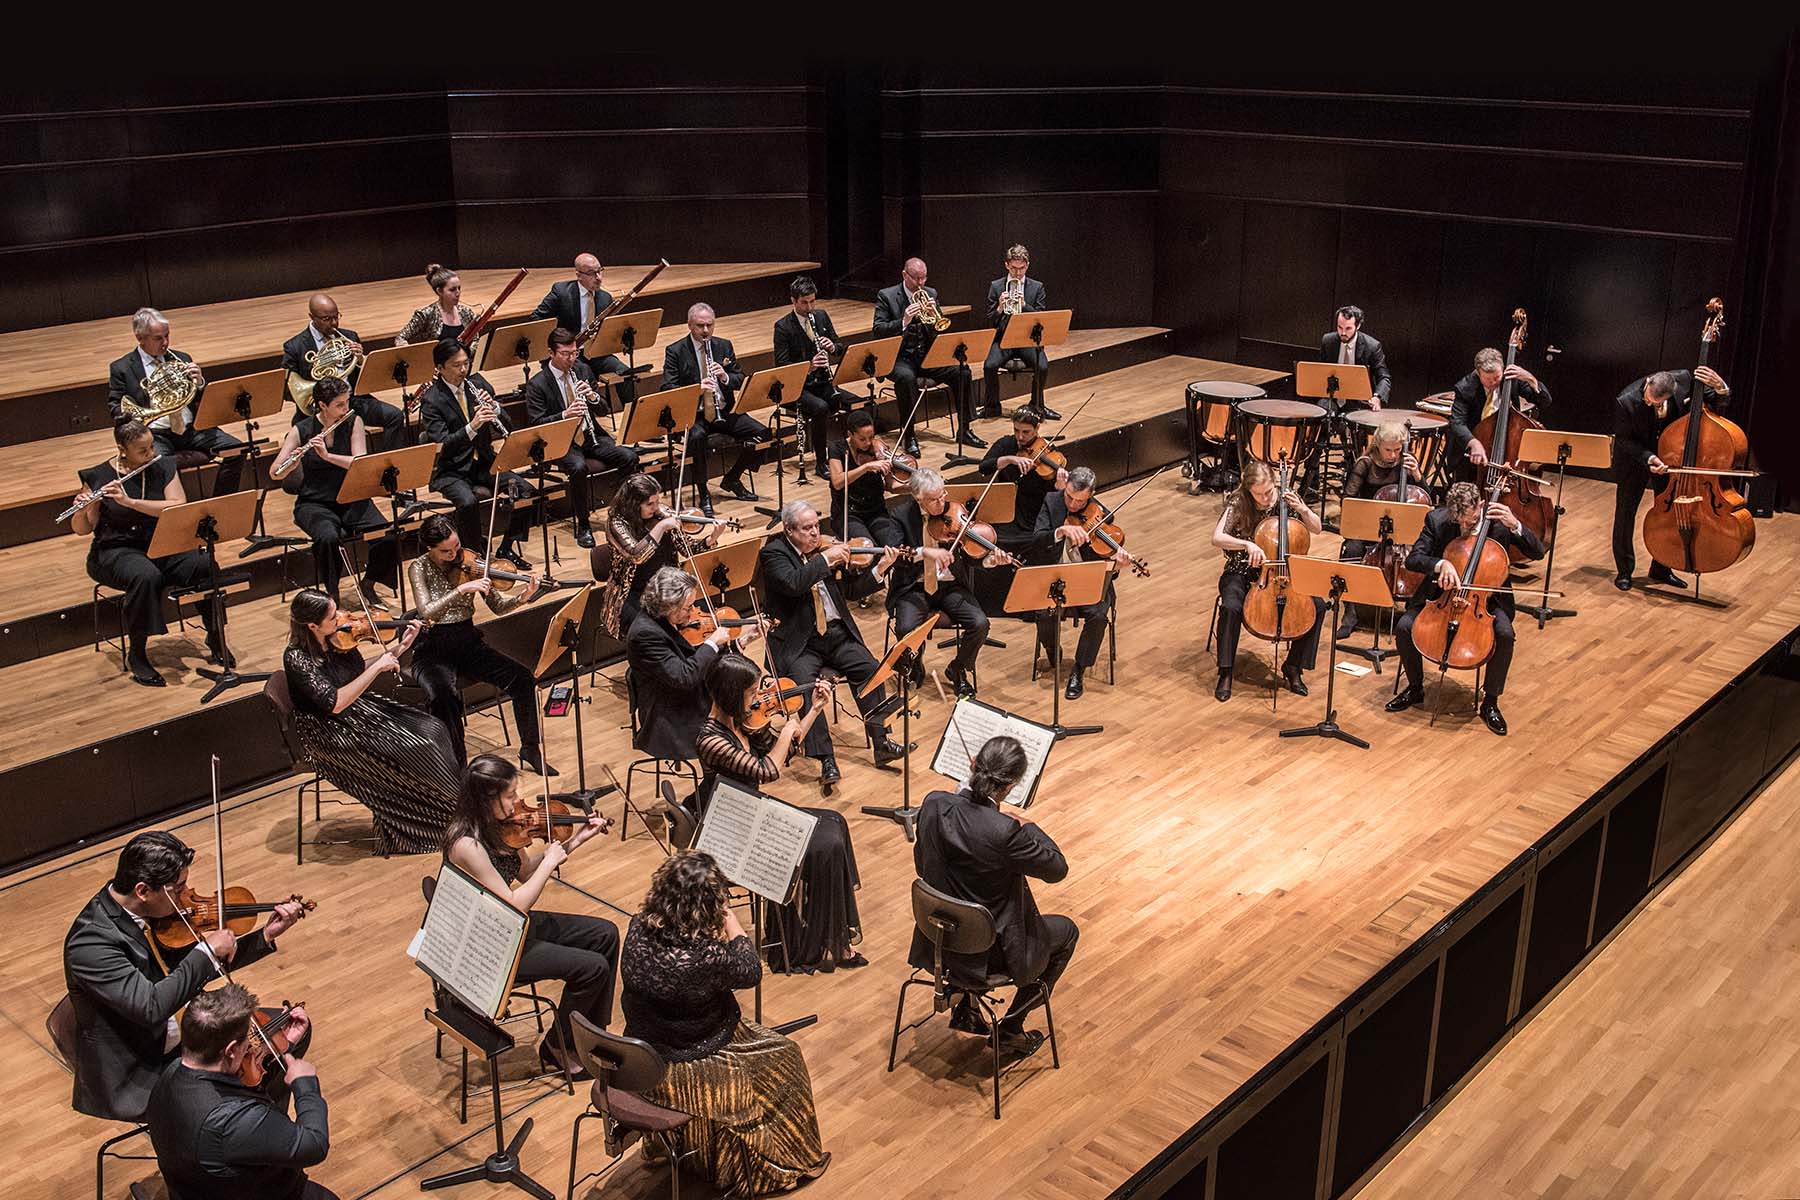 Known for their innovative and conductor-less approach to orchestral performance, the Orpheus Chamber Orchestra has garnered praise for their high-level musicianship. (Neda Navaee)